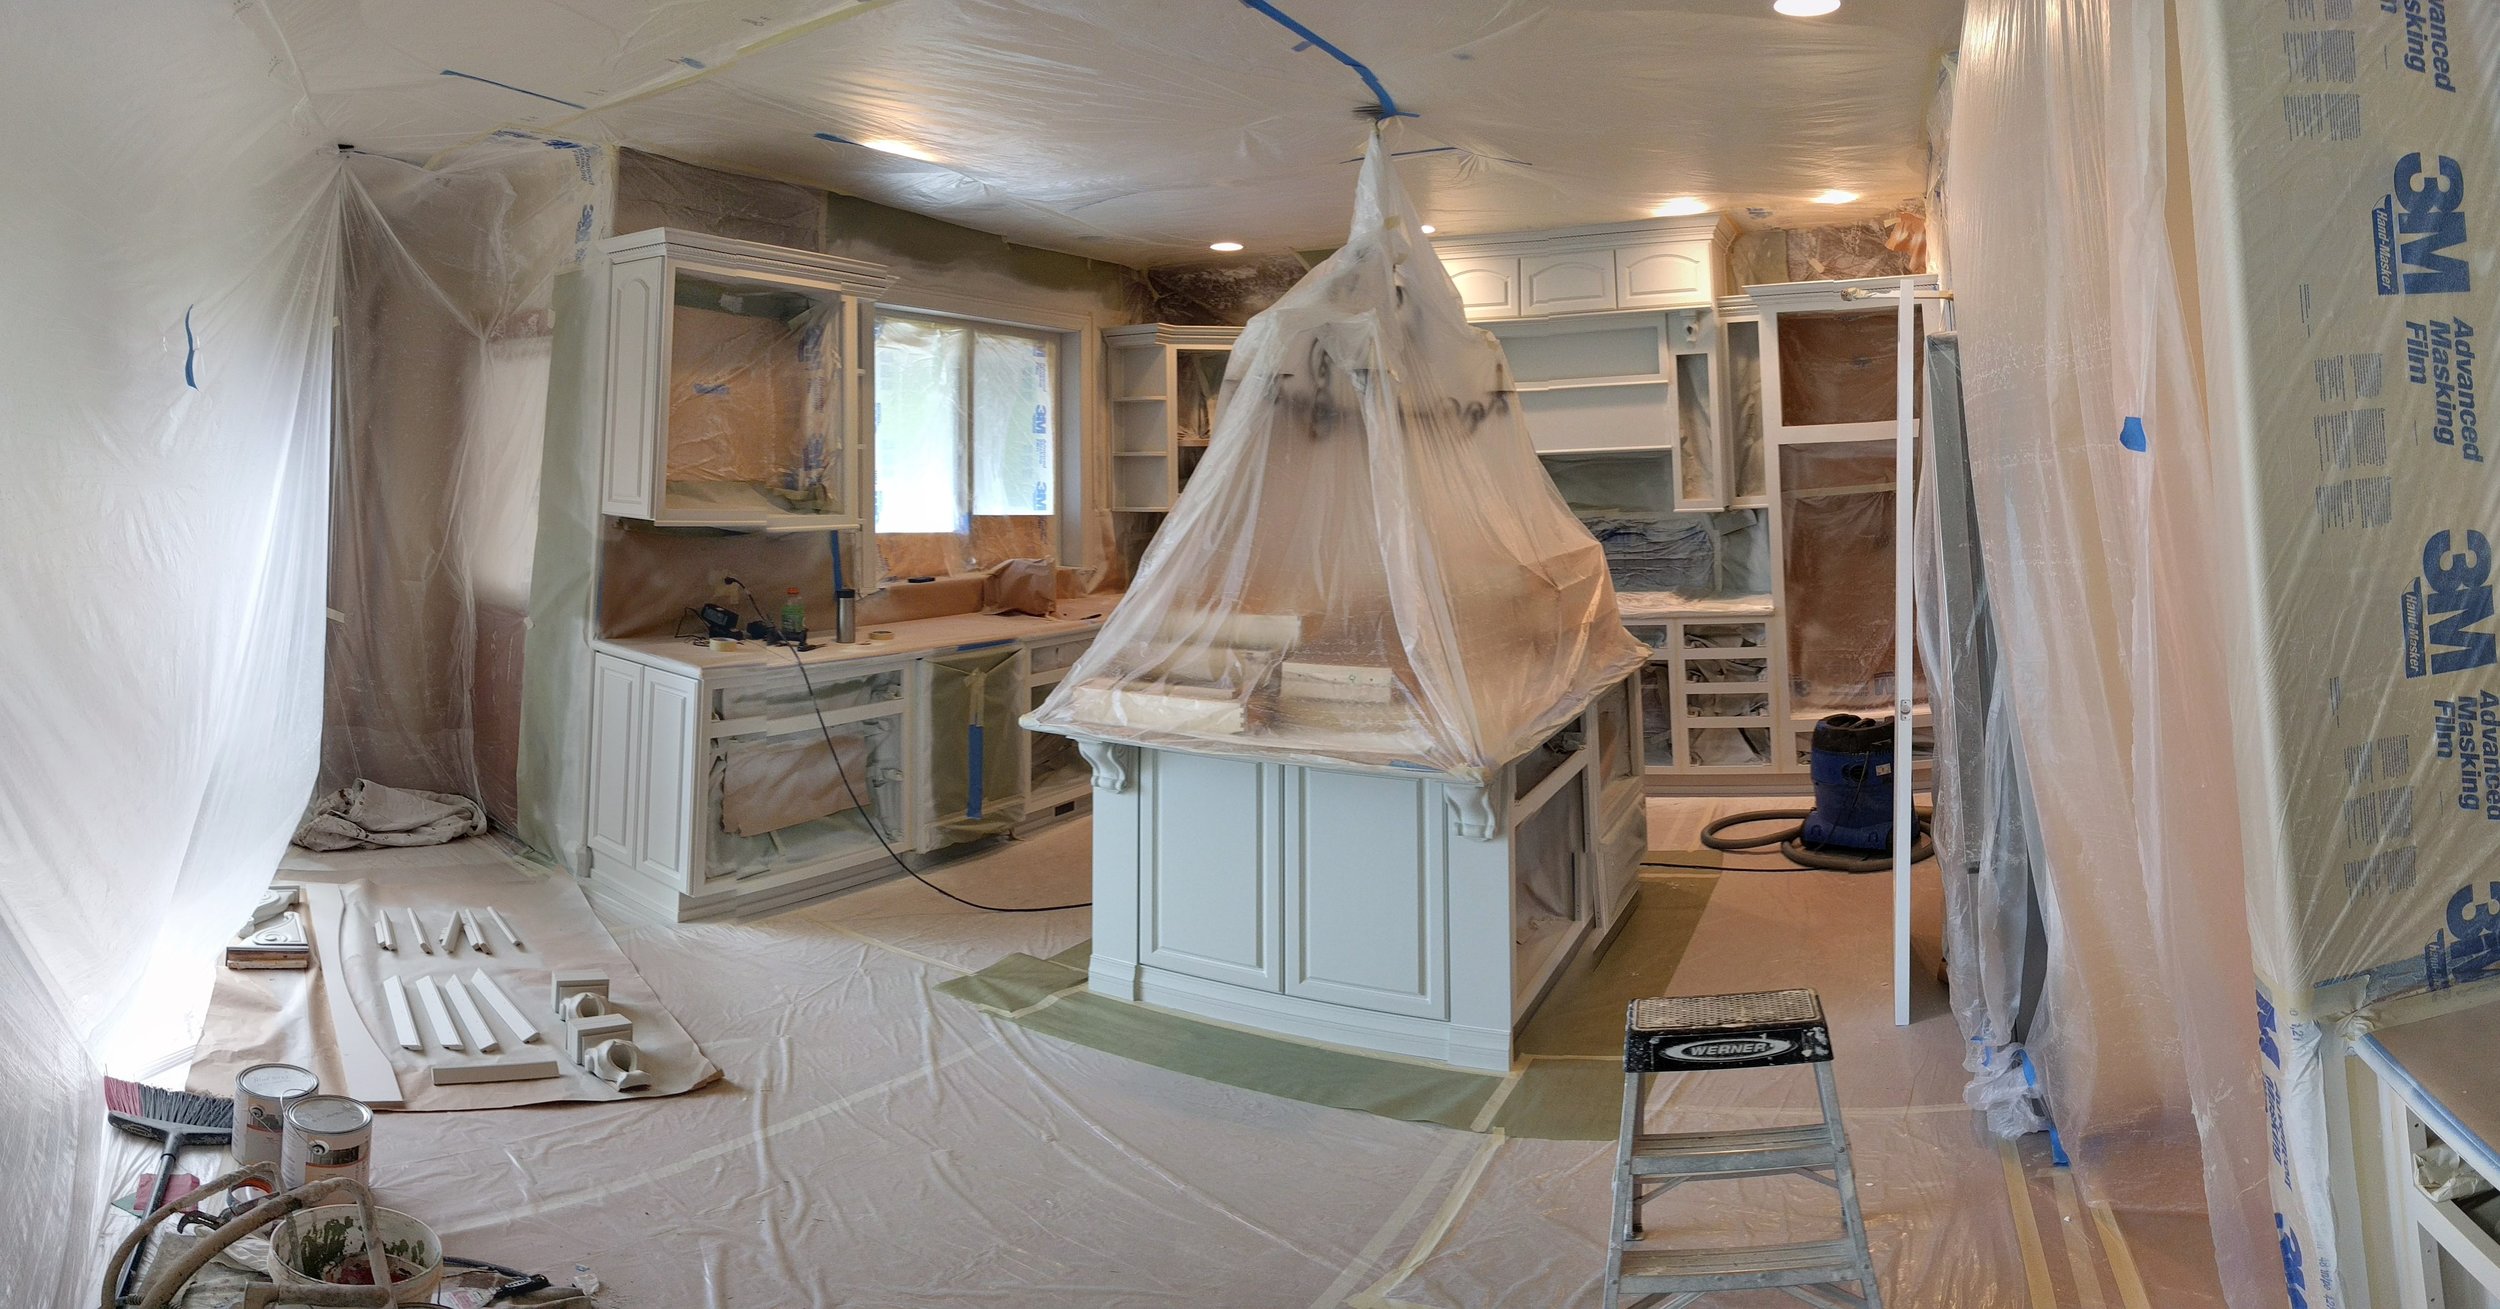  Cabinet painting requires a lot of masking and protecting of the home. 